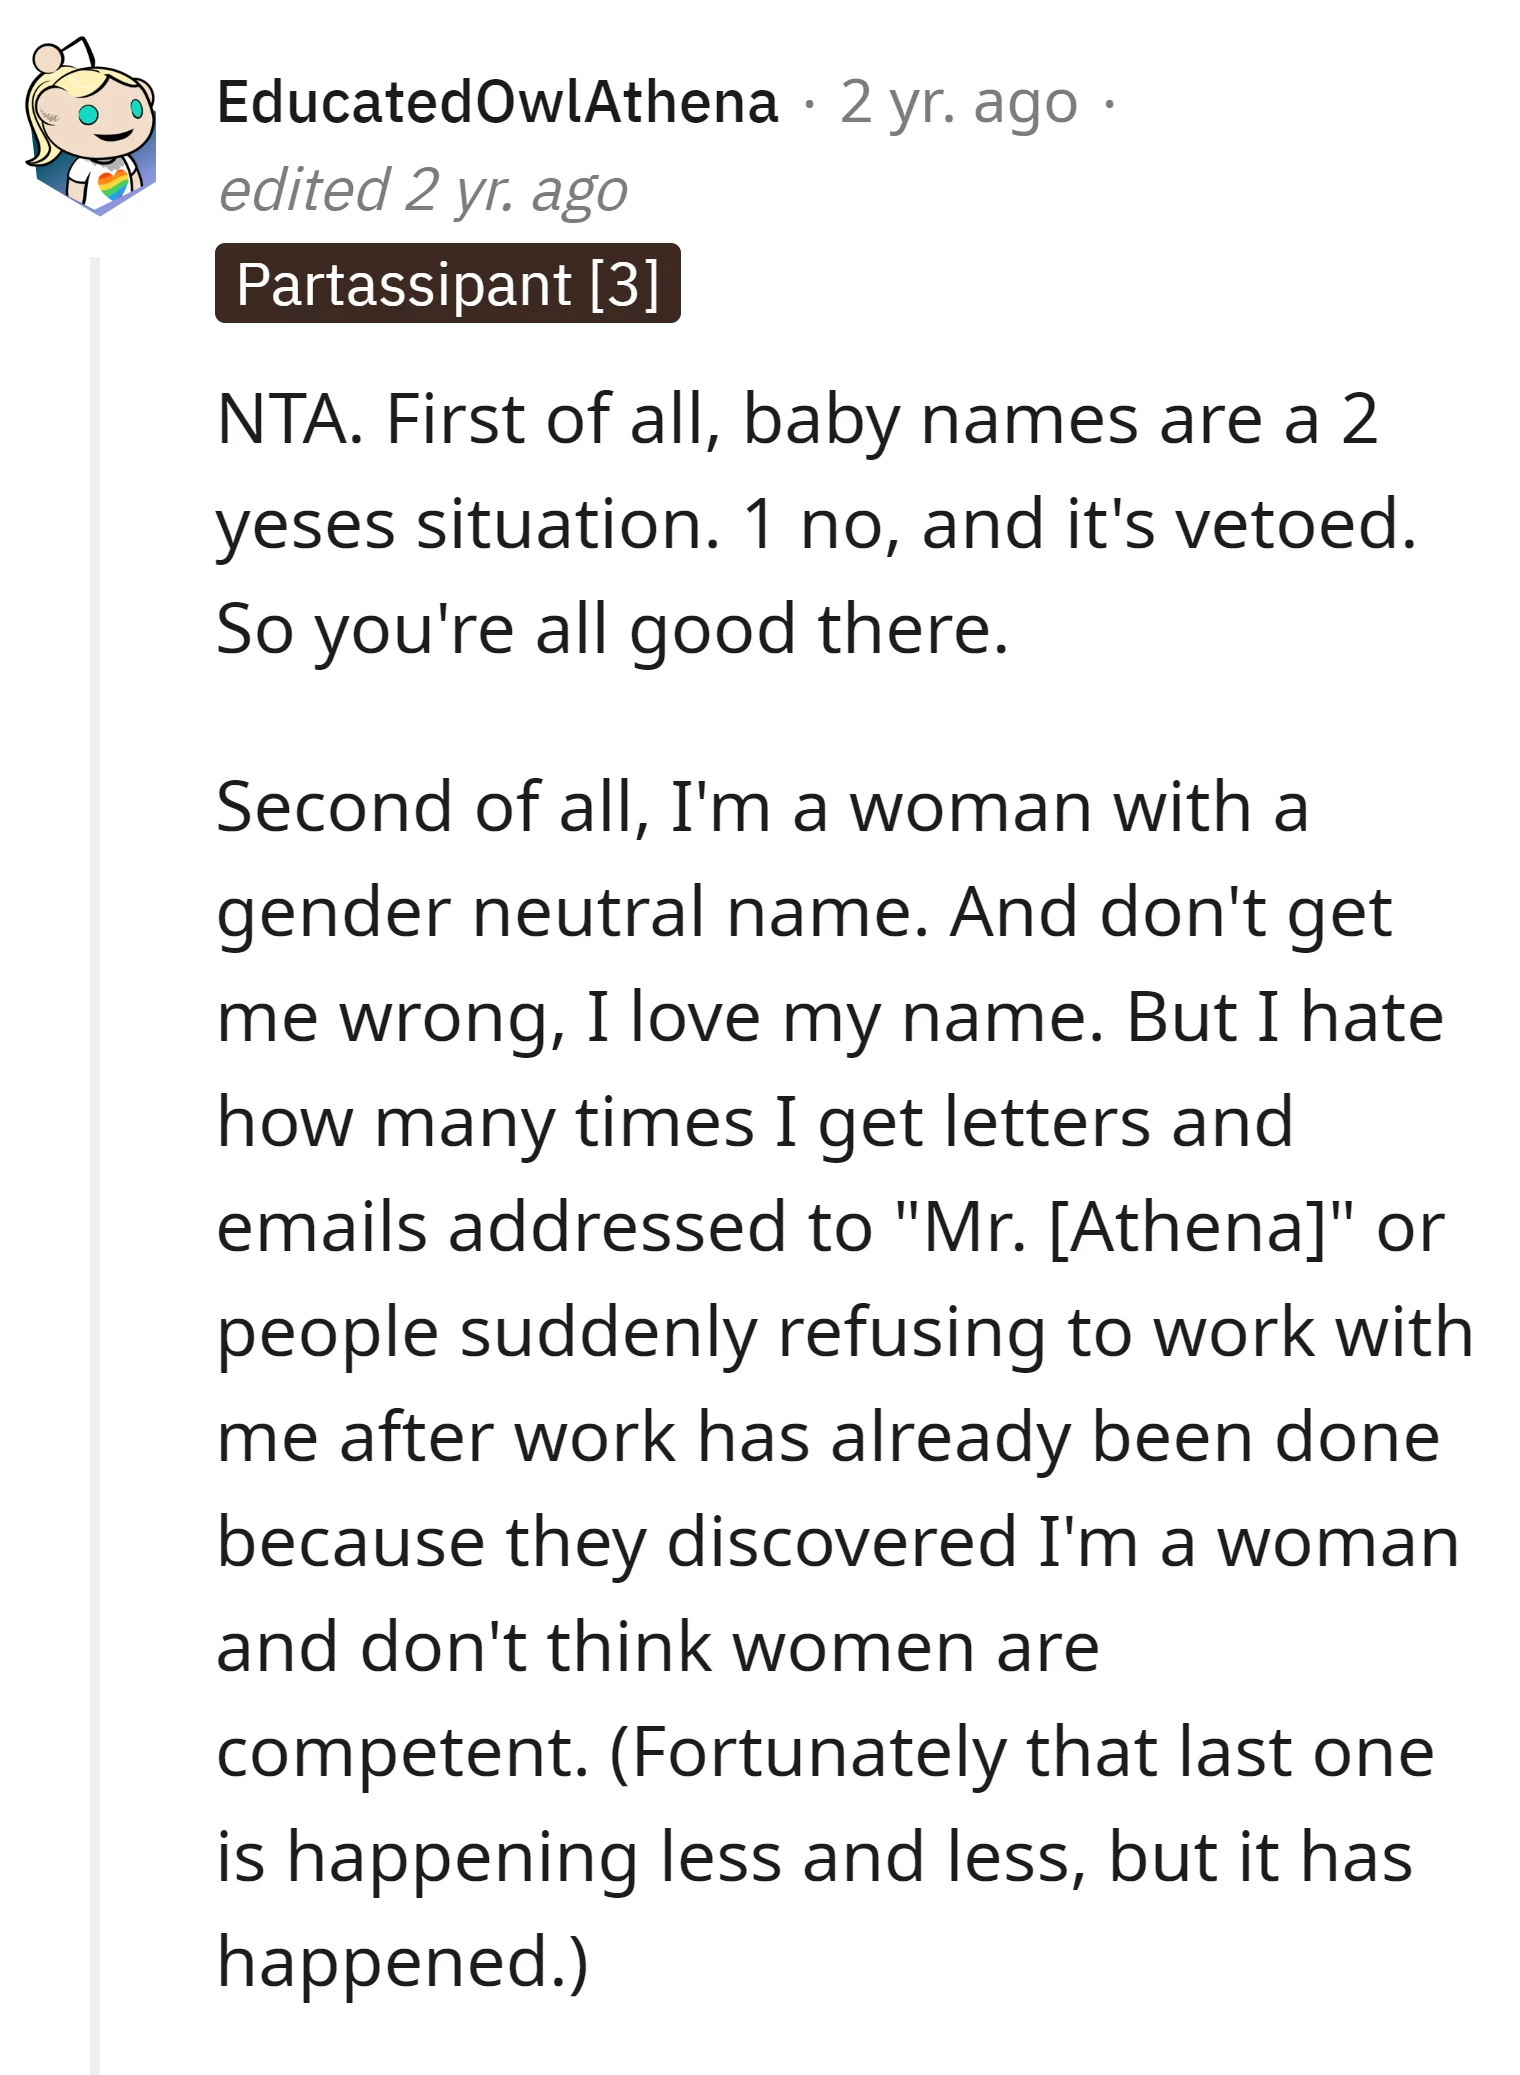 This redditor shares what she thinks about her name